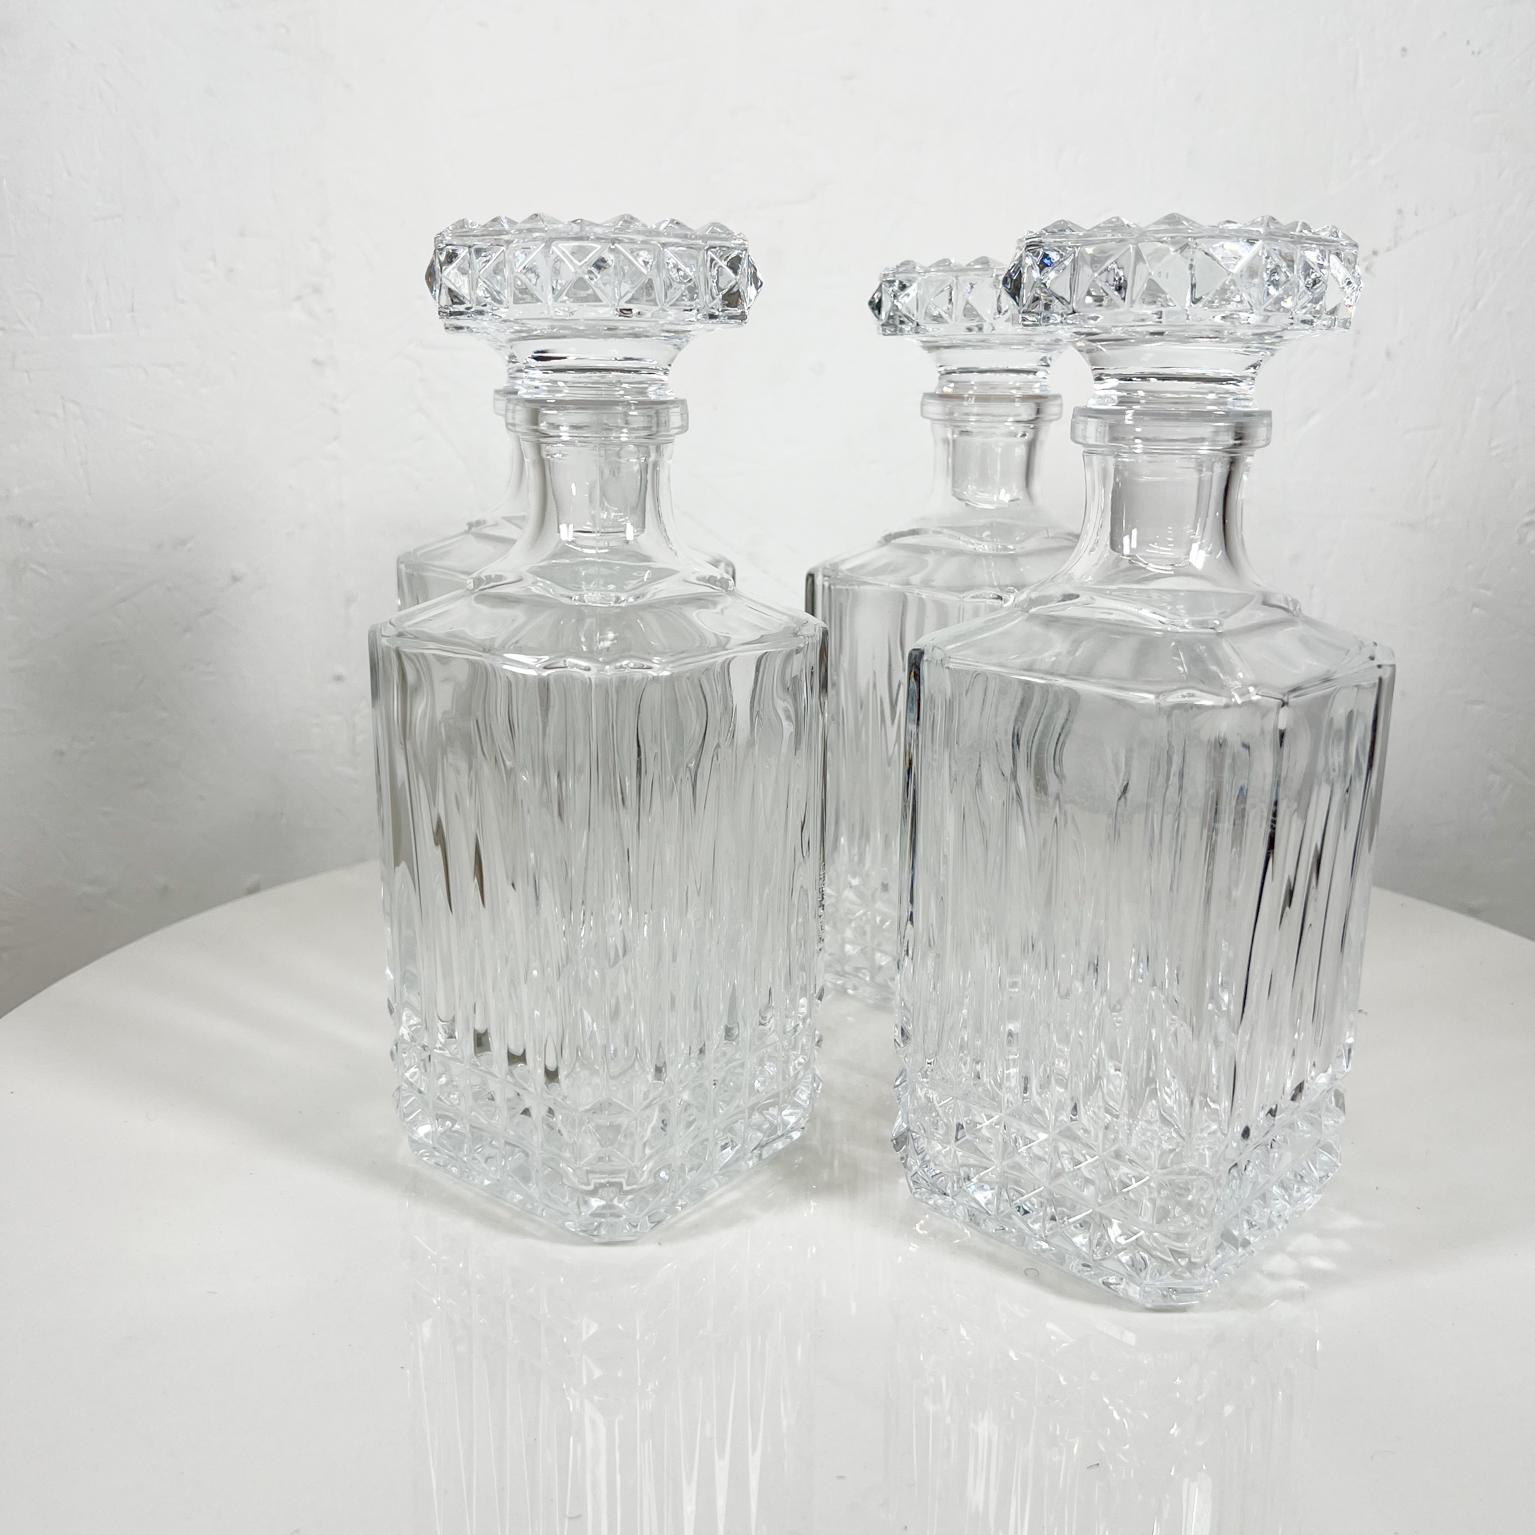 Late 20th Century Modernist Square Cut Glass Decanters Liquor Bar Whiskey Bottle Set of Four